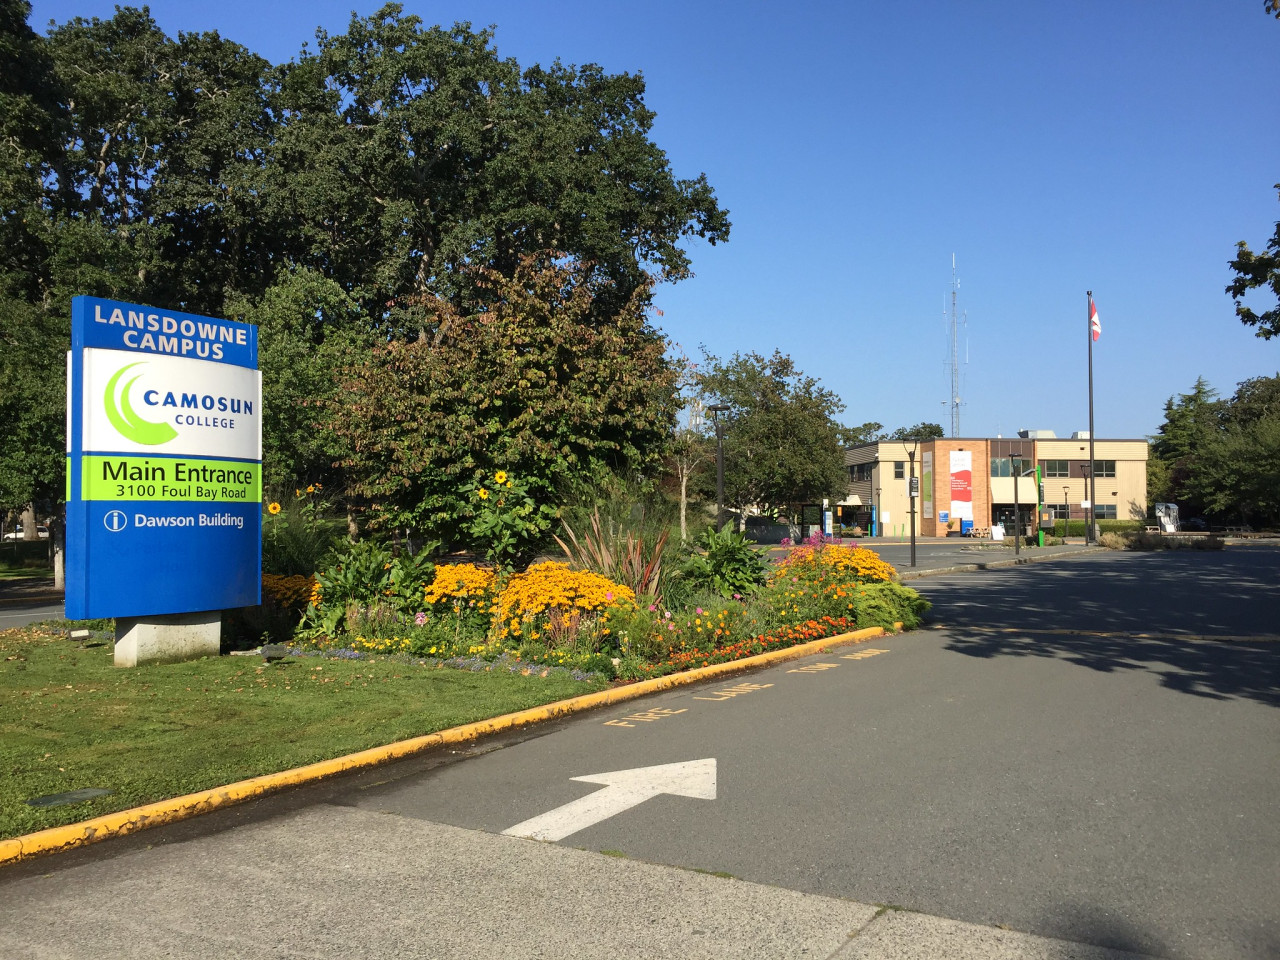 Image of Interurban campus sign for Camosun College on a nice sunny day with trees and a building in the background. Entry road with a white arrow in the front.